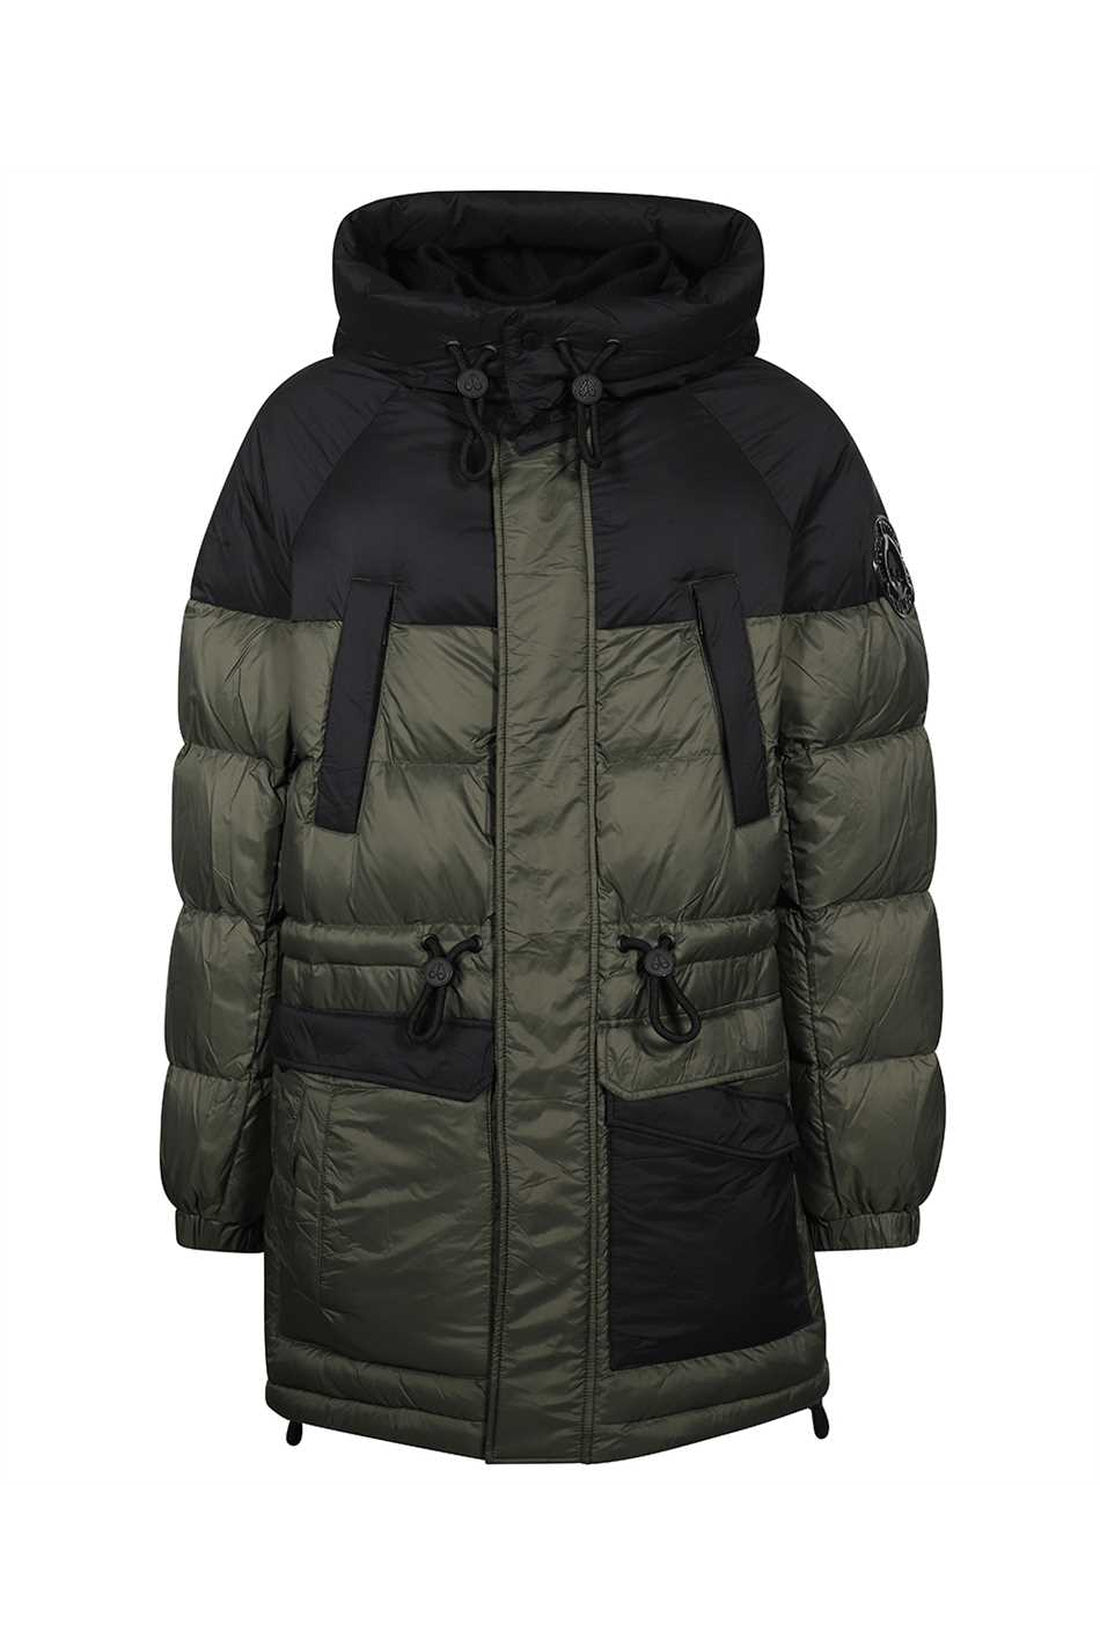 Moose Knuckles-OUTLET-SALE-Holcombe long down jacket-ARCHIVIST